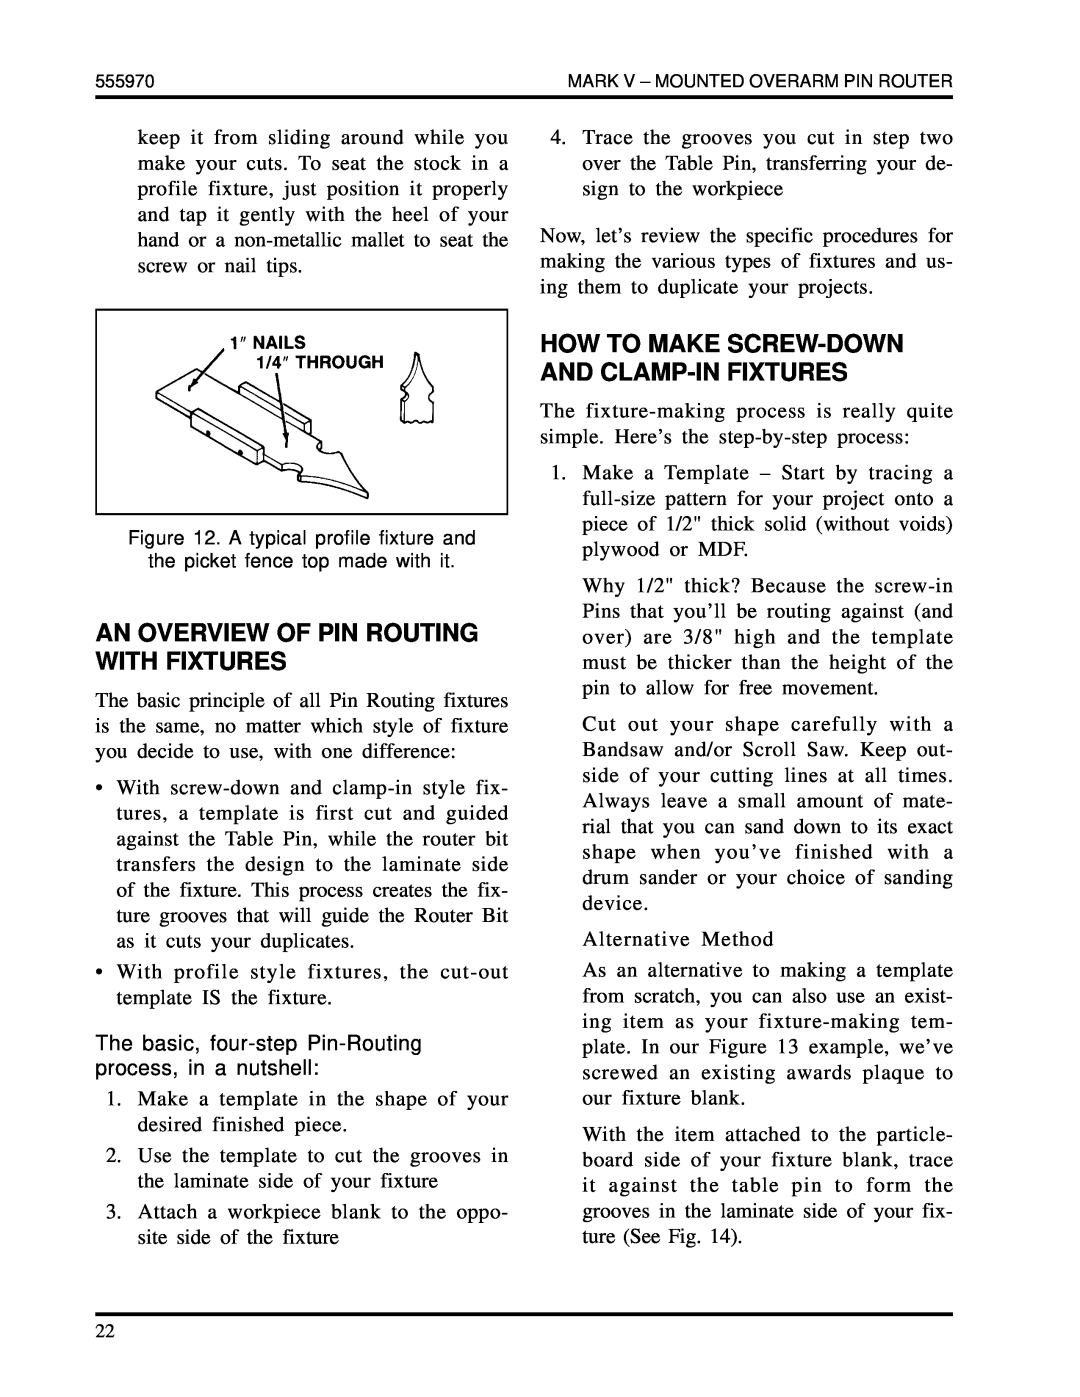 Shopsmith 555970 manual An Overview Of Pin Routing With Fixtures, How To Make Screw-Downand Clamp-Infixtures 